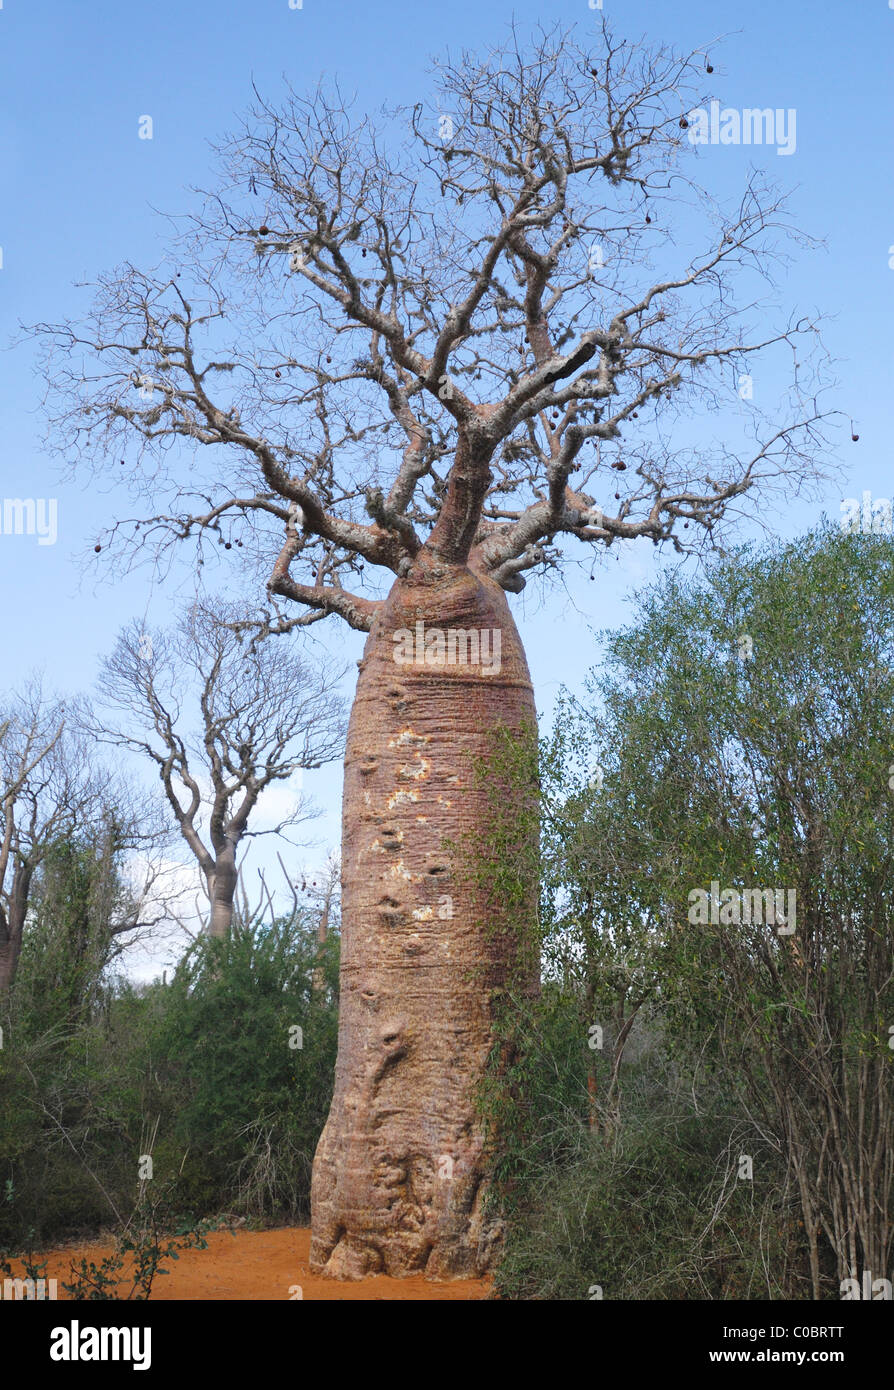 Giant Baobab tree in the spiny forest of Ifaty, western madagascar Stock Photo